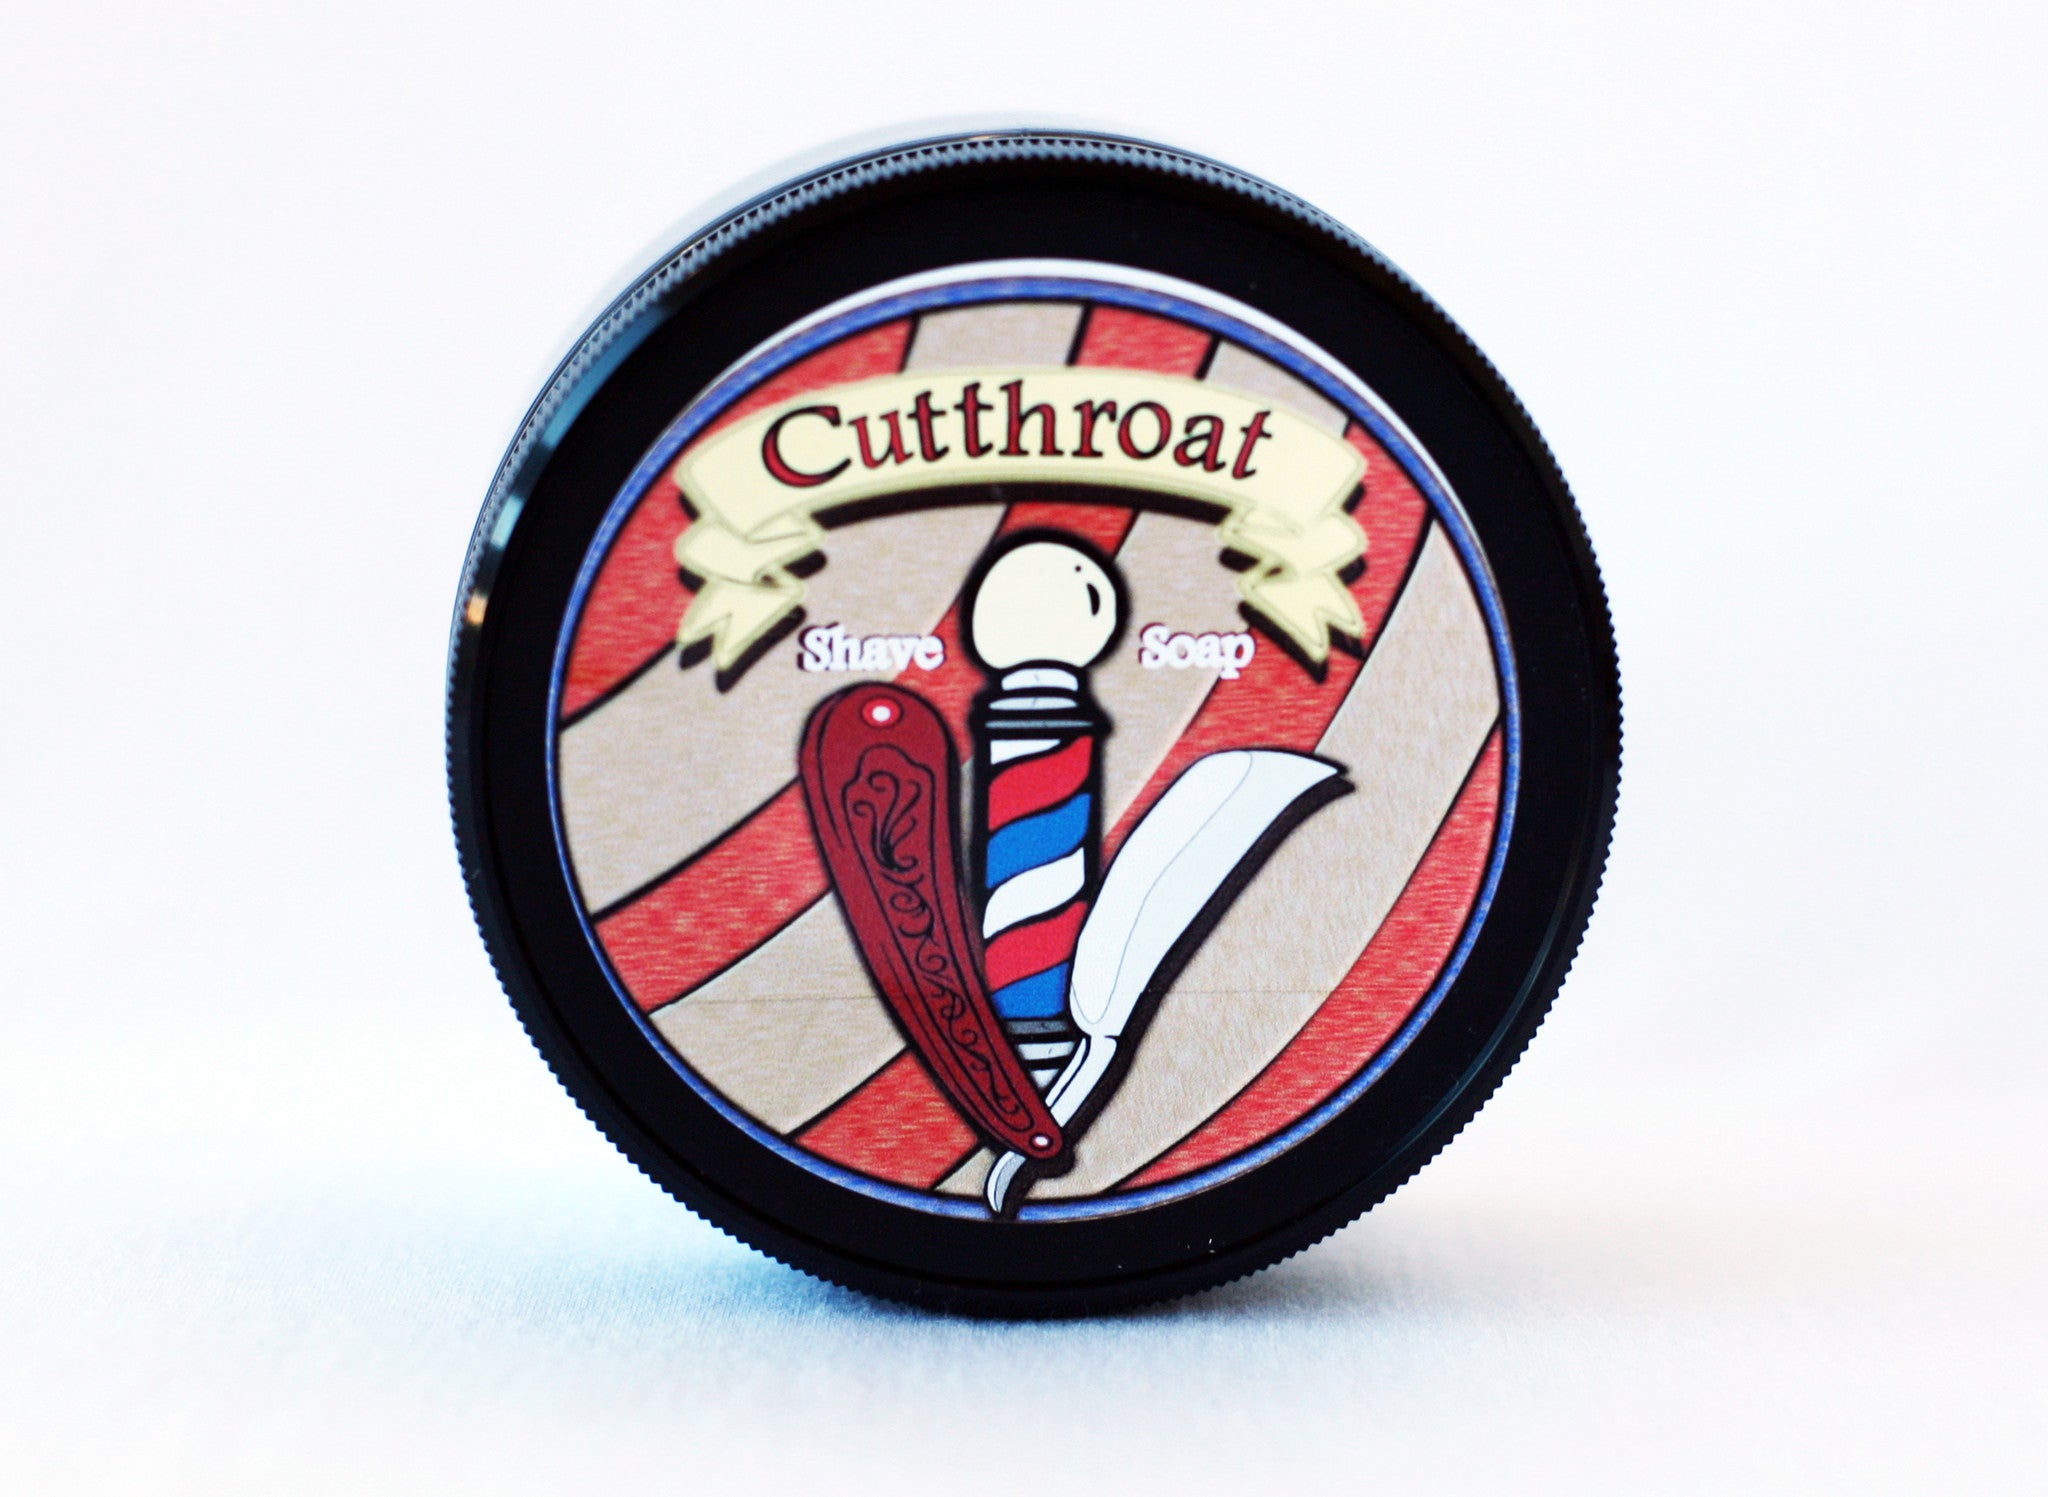 Cutthroat Vegan Shave Soap artwork pictures on a plastic container - CreationsByWill